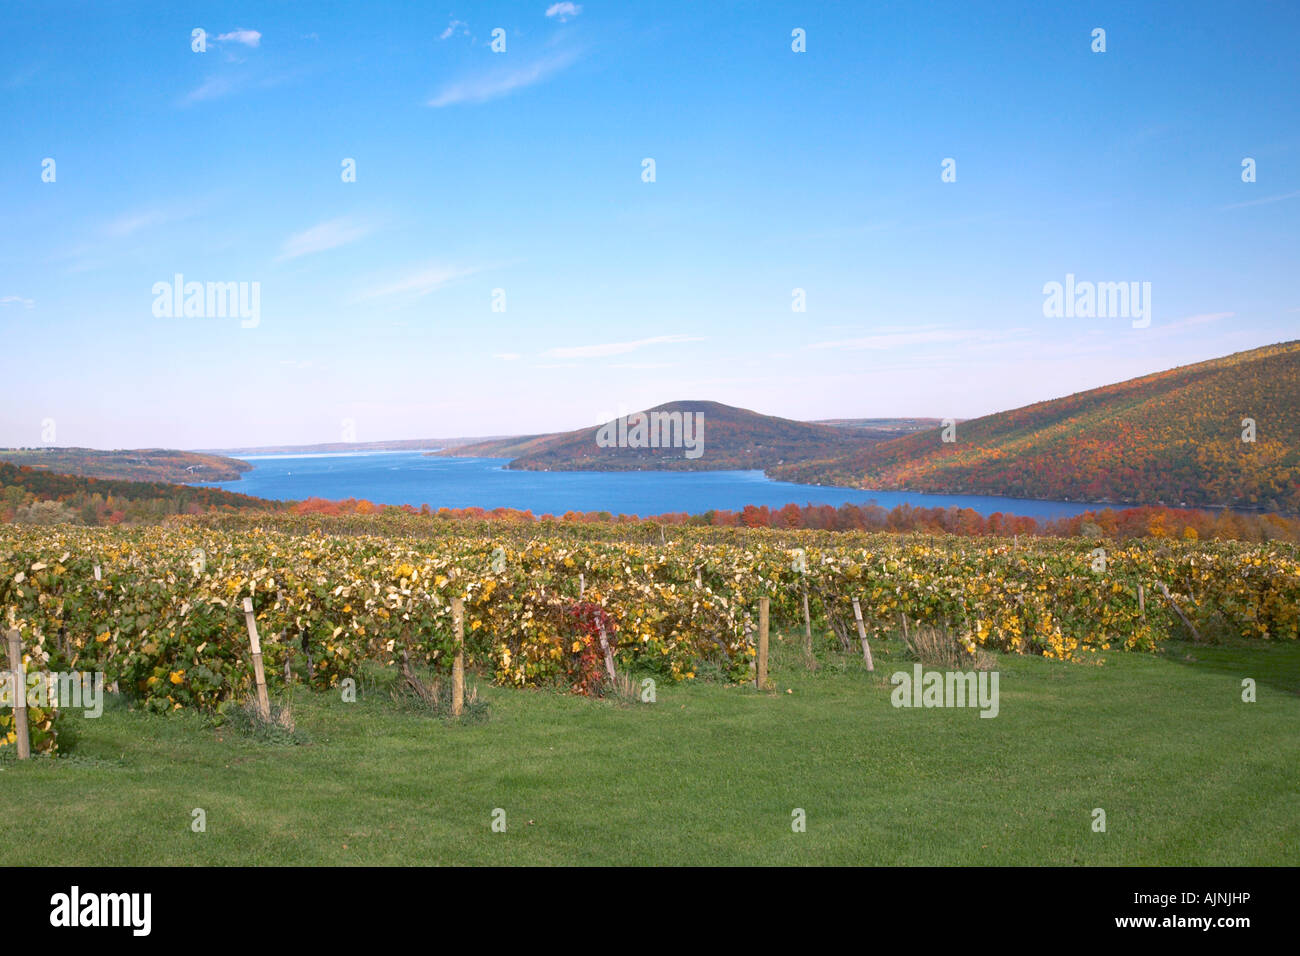 Grape vineyards in the fall on Canadaigua Lake Finger Lakes New York United States Stock Photo